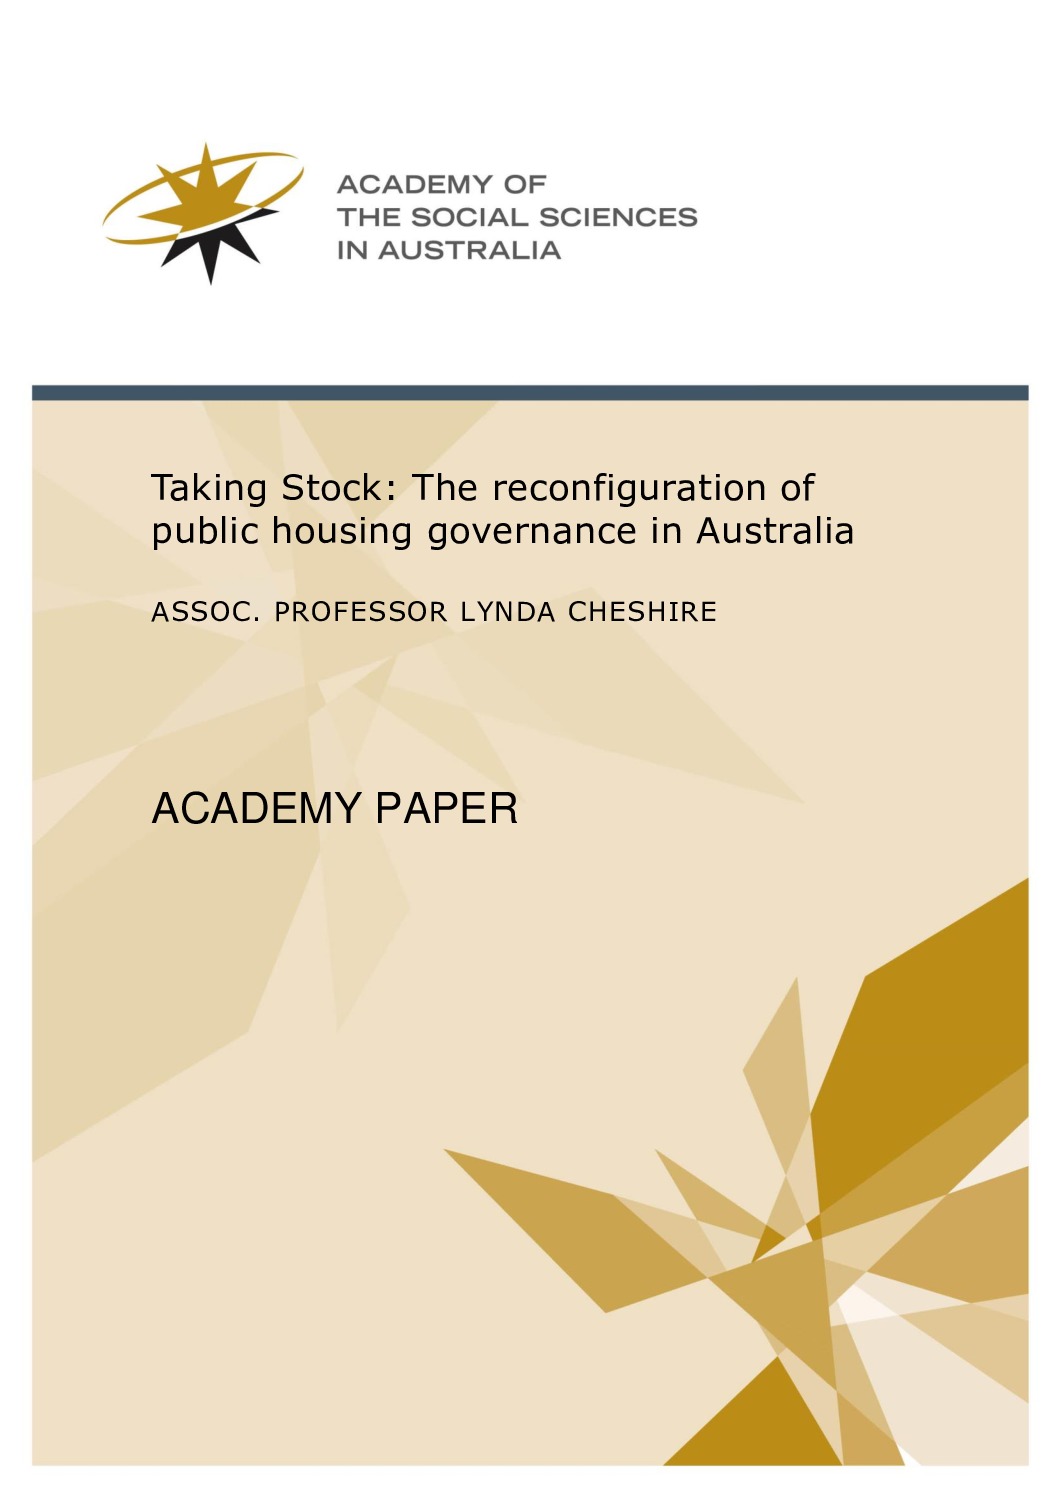 Academy Paper 8 Taking Stock The reconfiguration of public housing governance in Australia Final 1 pdf 1